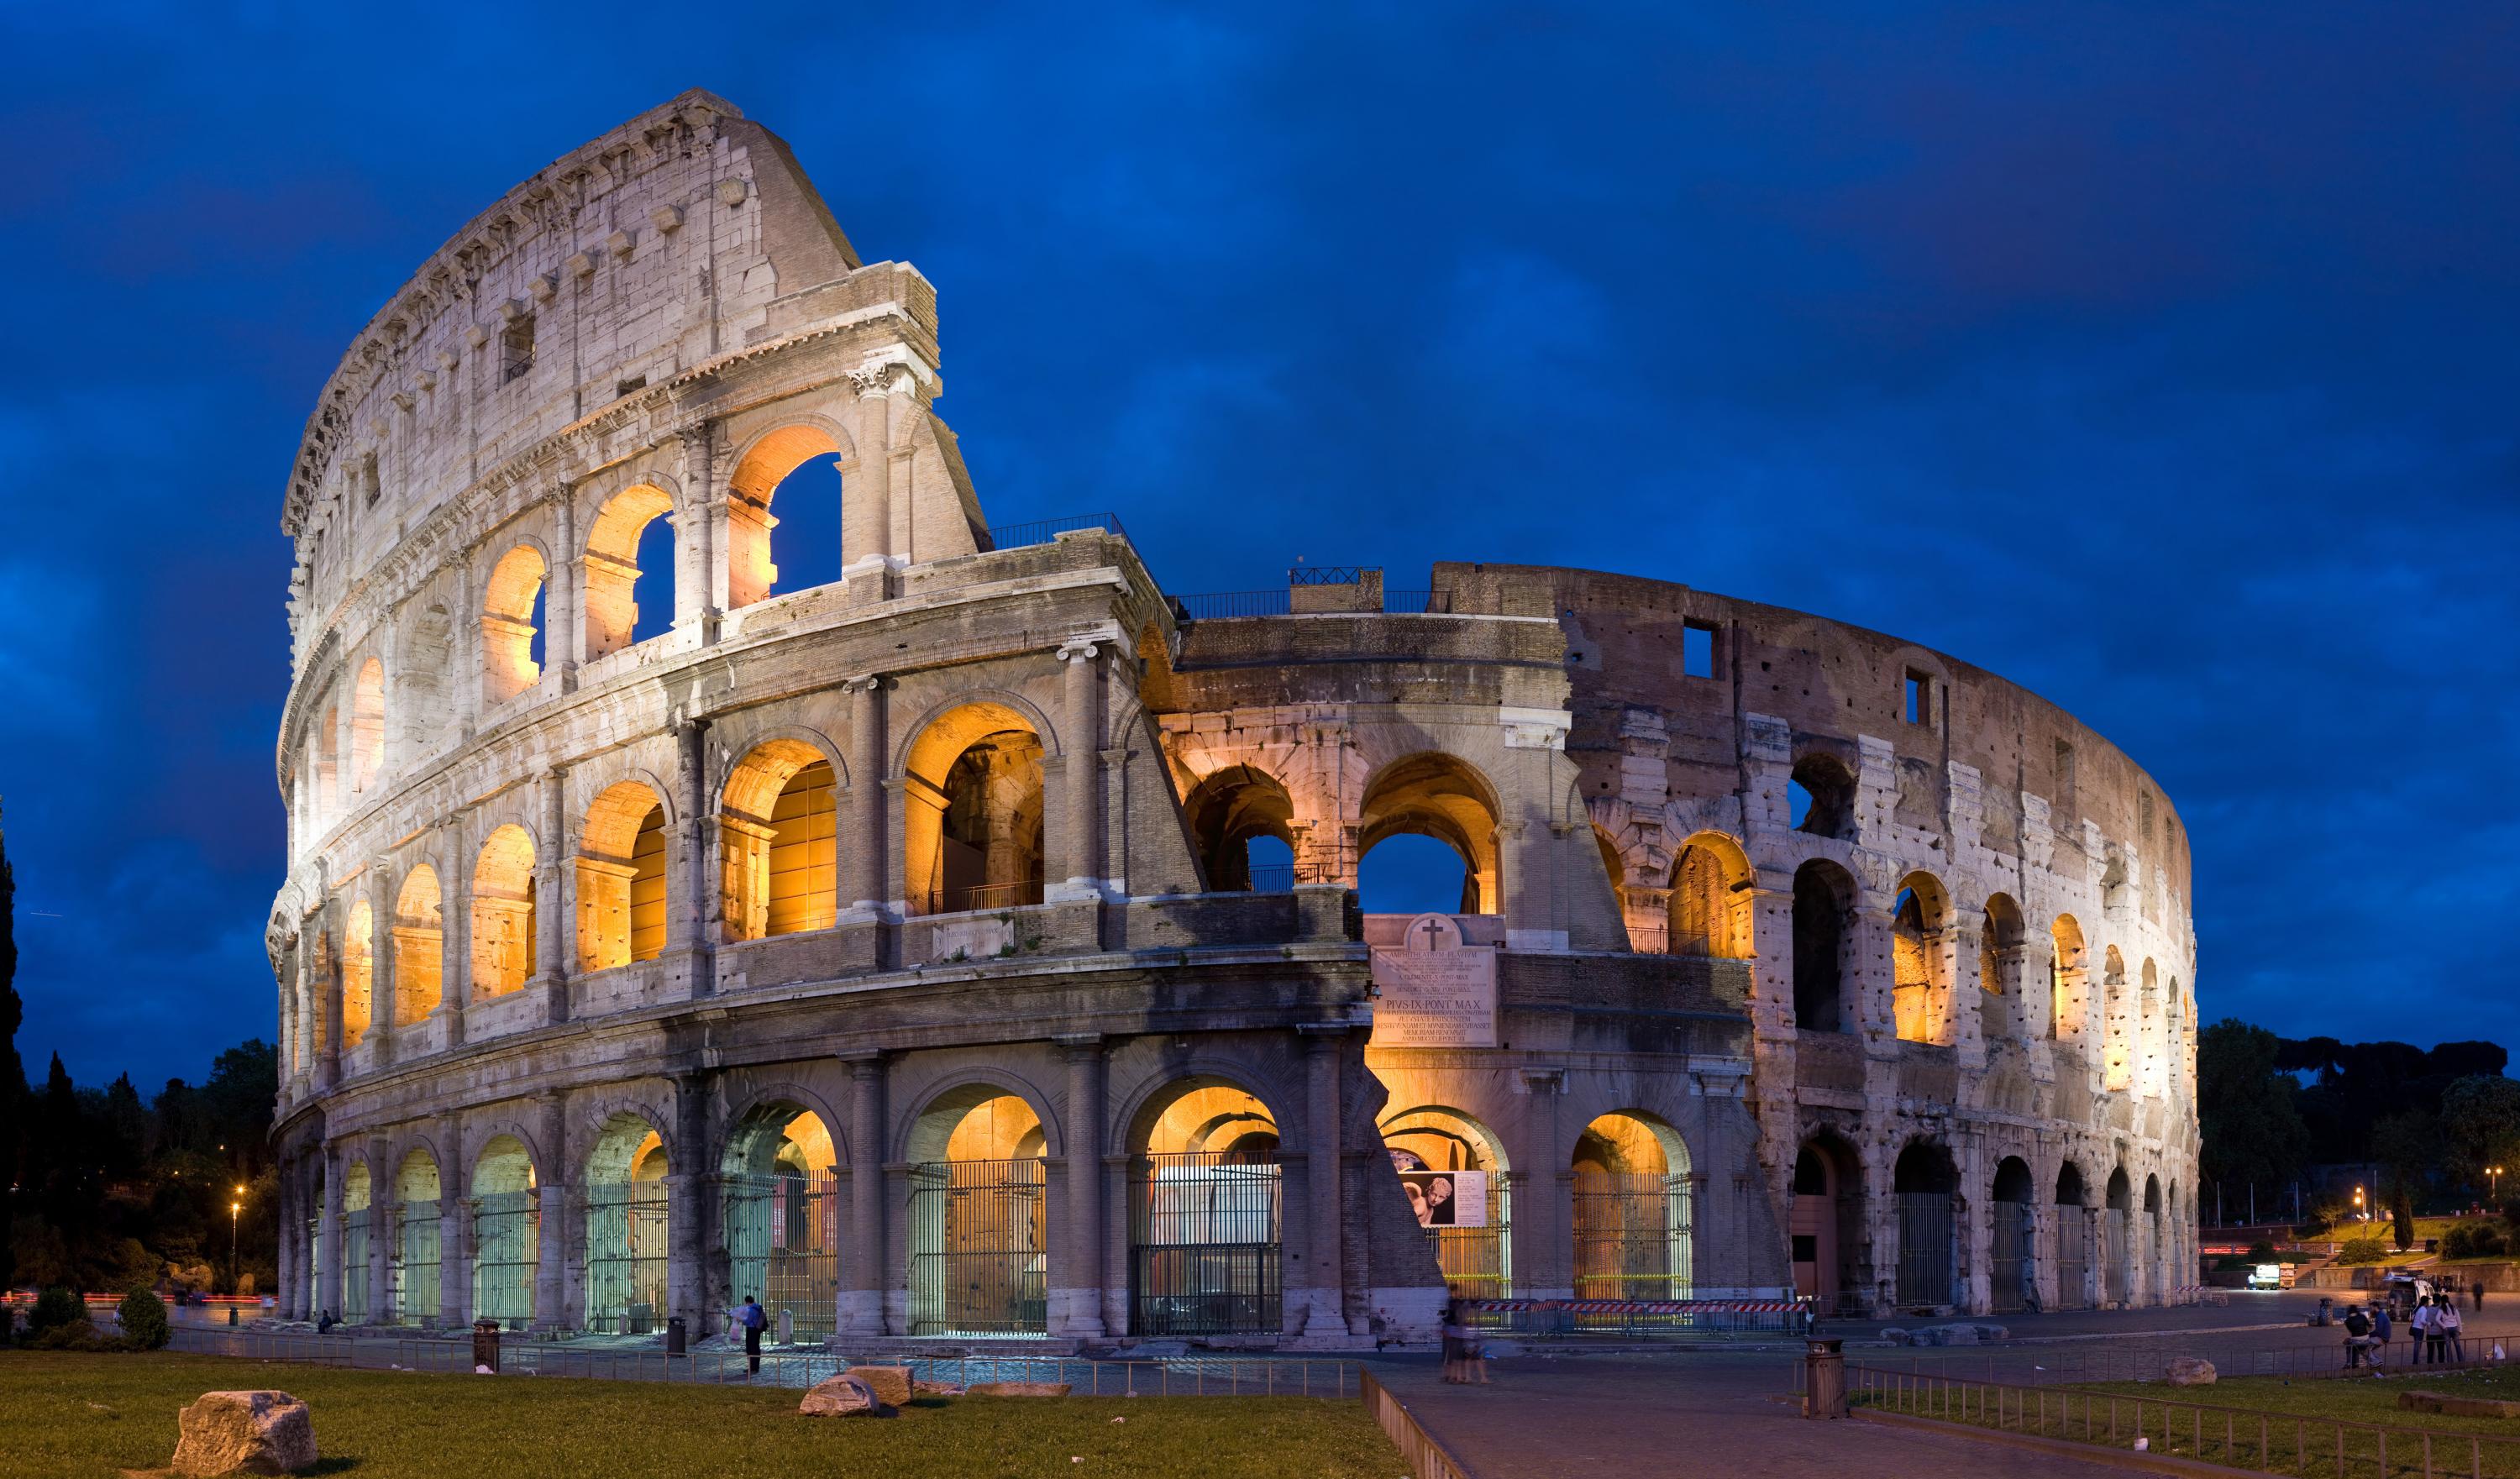 Roman arenas have survived in many earthquake-prone regions. Did the Romans inadvertently build seismic wave cloaks when they designed colosseums? Some researchers believe they did due to the arenas' resemblance to modern experimental elastodynamic cloaking devices. Photo: DAVID ILIFF. License: CC BY-SA 3.0 https://creativecommons.org/licenses/by-sa/2.5 